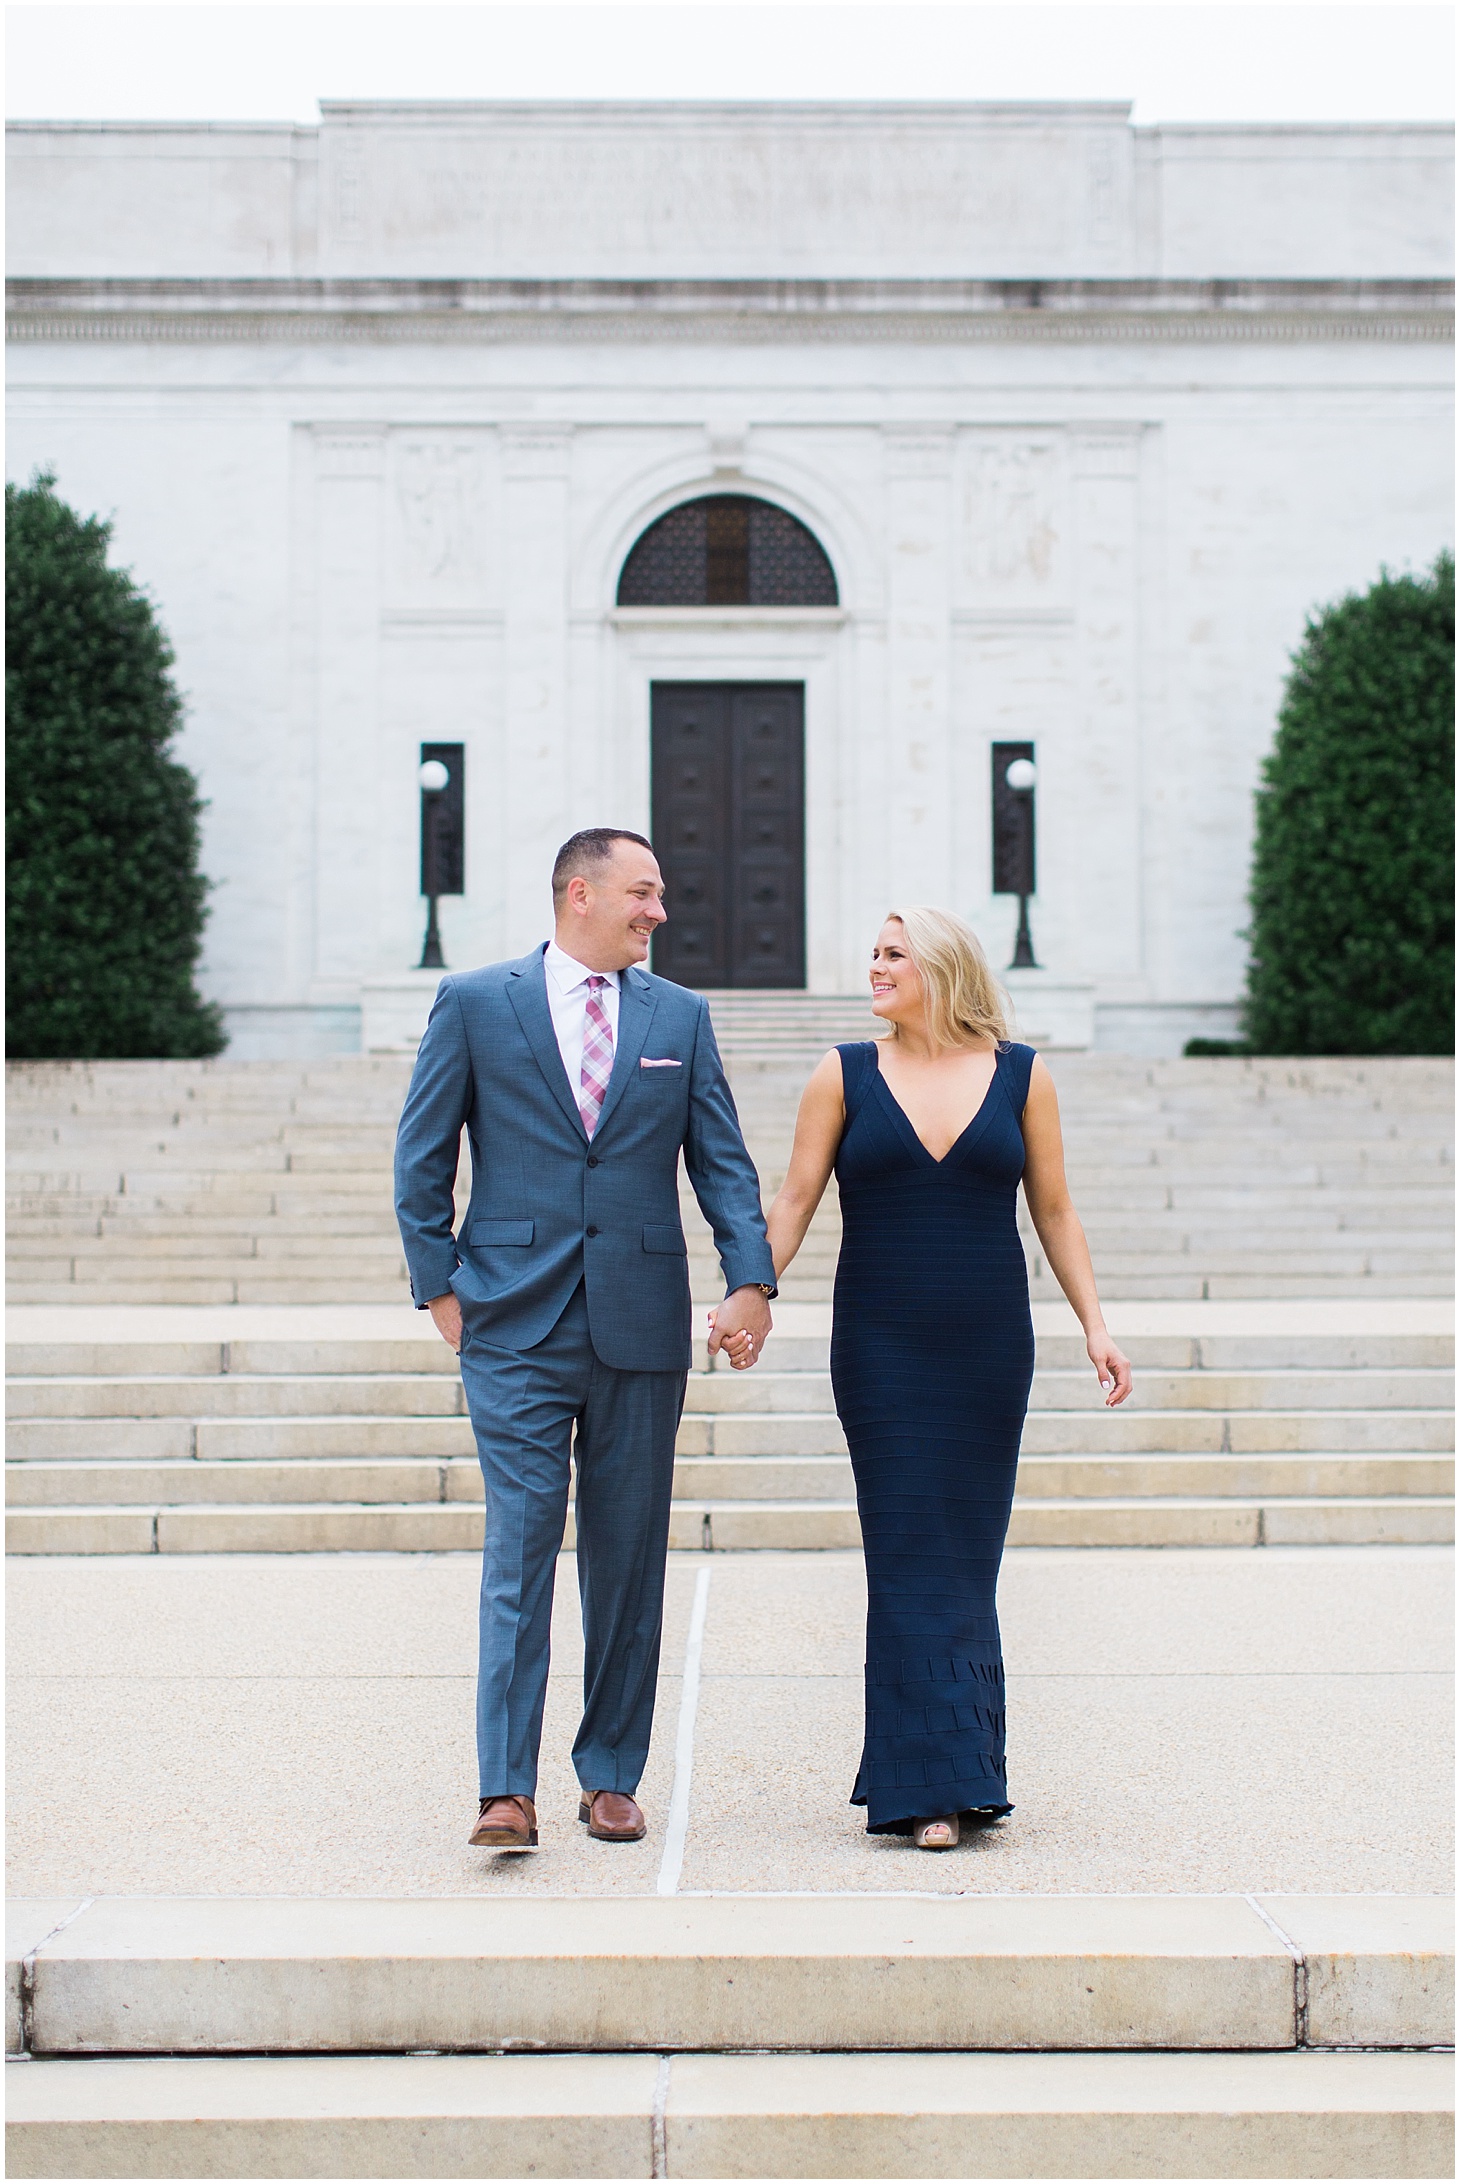 romantic-engagement-shoot-around-the-beautiful-d-c-monuments-by-sarah-bradshaw-photography_0005